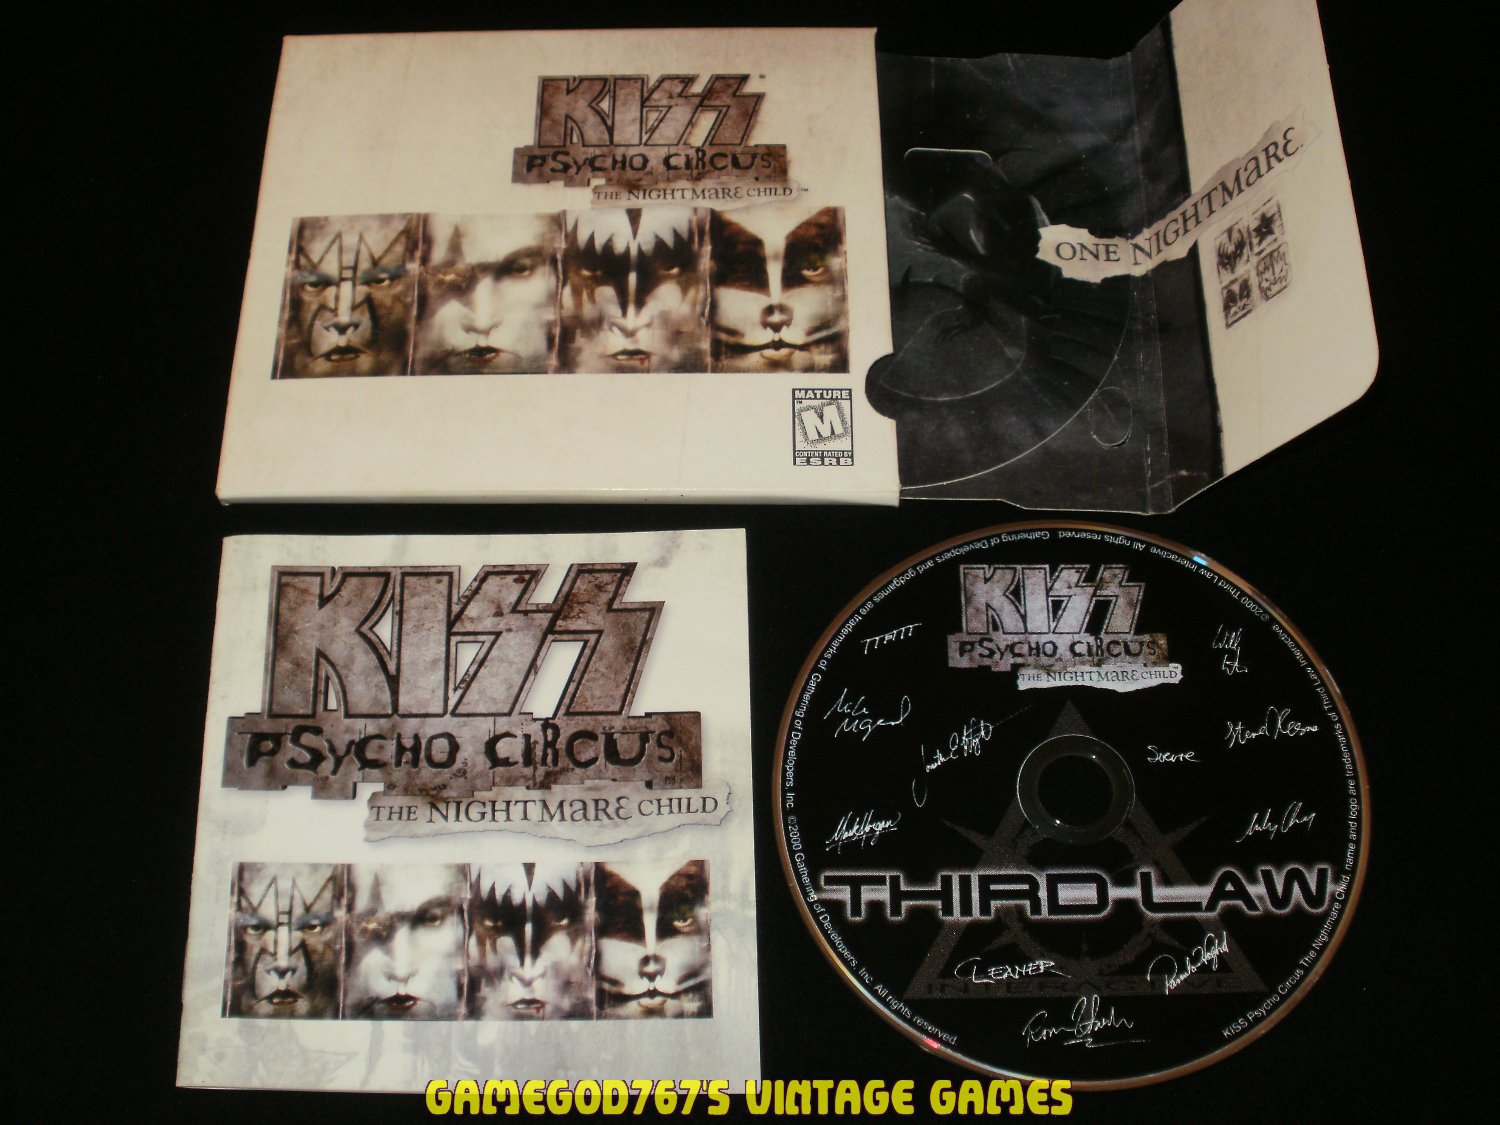 KISS Psycho Circus - IBM PC - 2000 Gathering of Developers